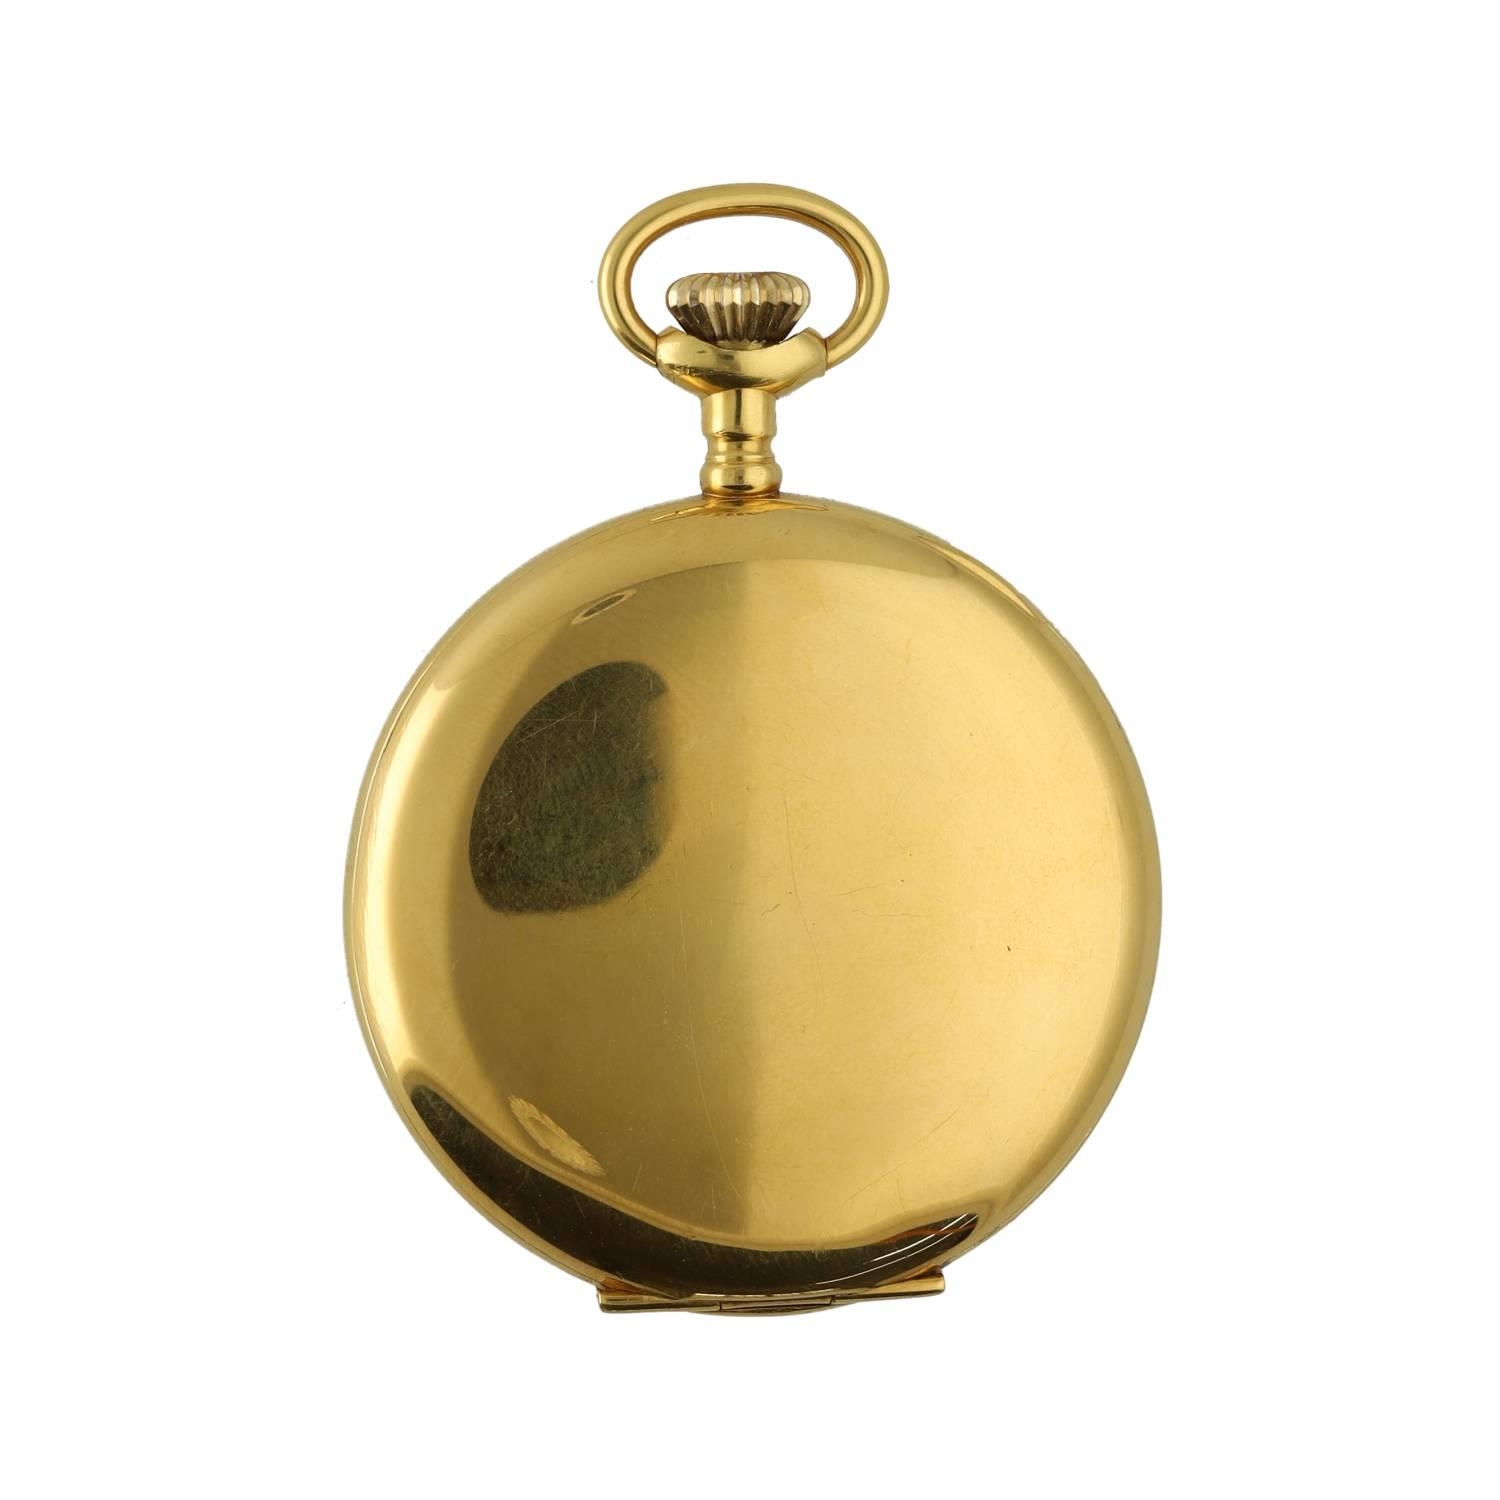 Elgin National Watch Co. 'B.W. Raymond' gold filled lever hunter pocket watch, circa 1910, serial - Image 4 of 4